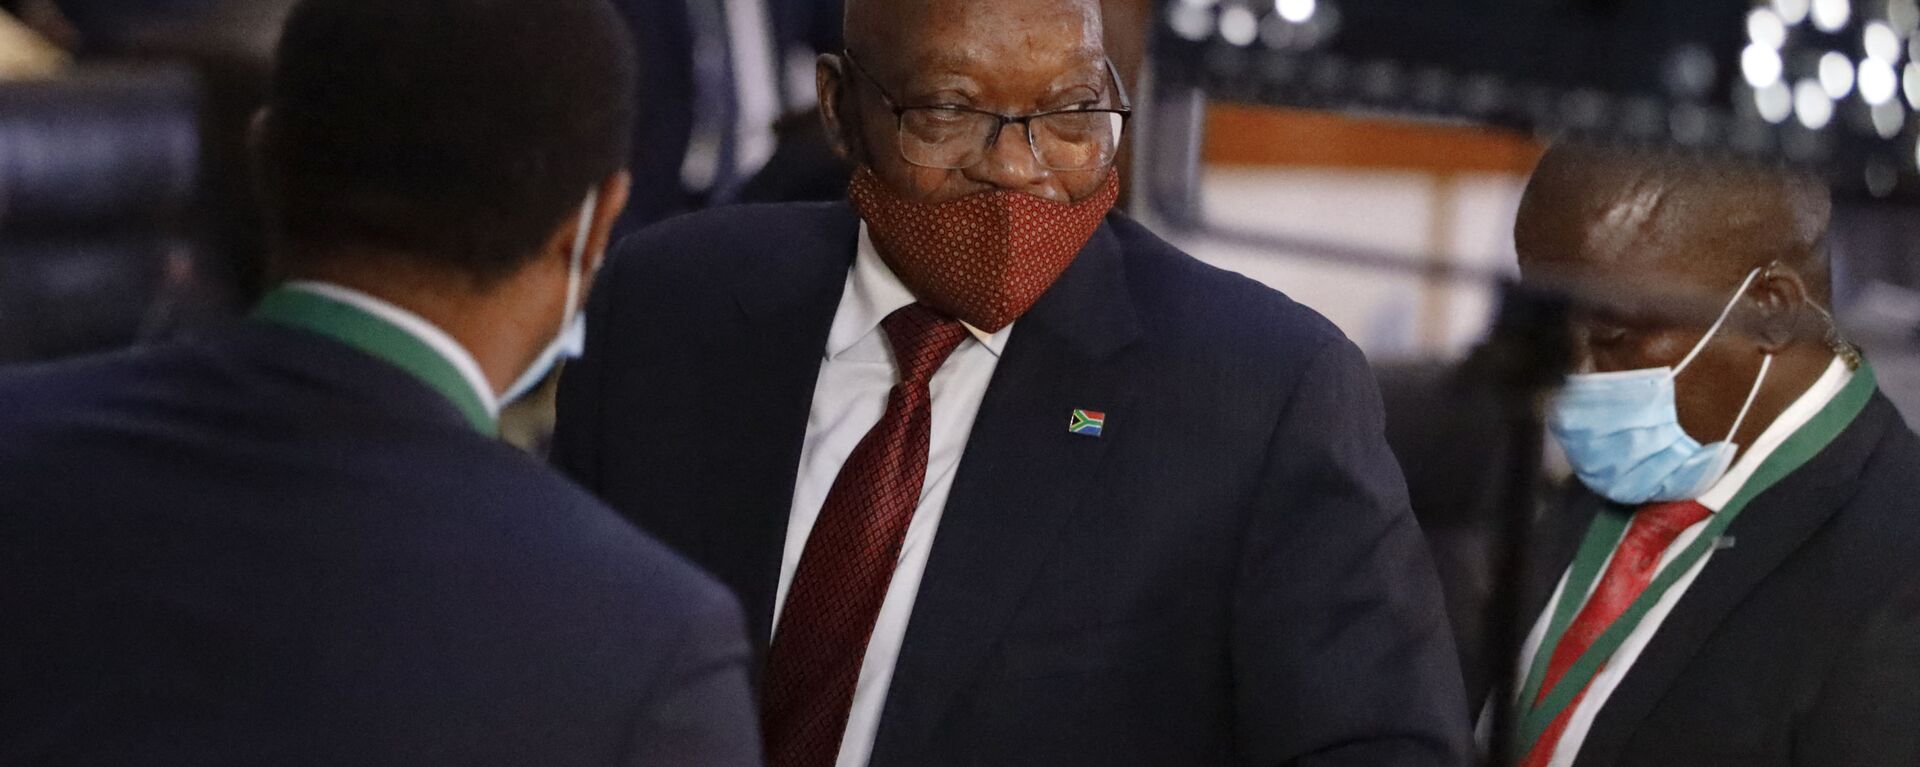 Former South African President Jacob Zuma (C) leaves the Commission of Inquiry into State Capture in Johannesburg during a break on November 16, 2020. - Sputnik International, 1920, 15.05.2021